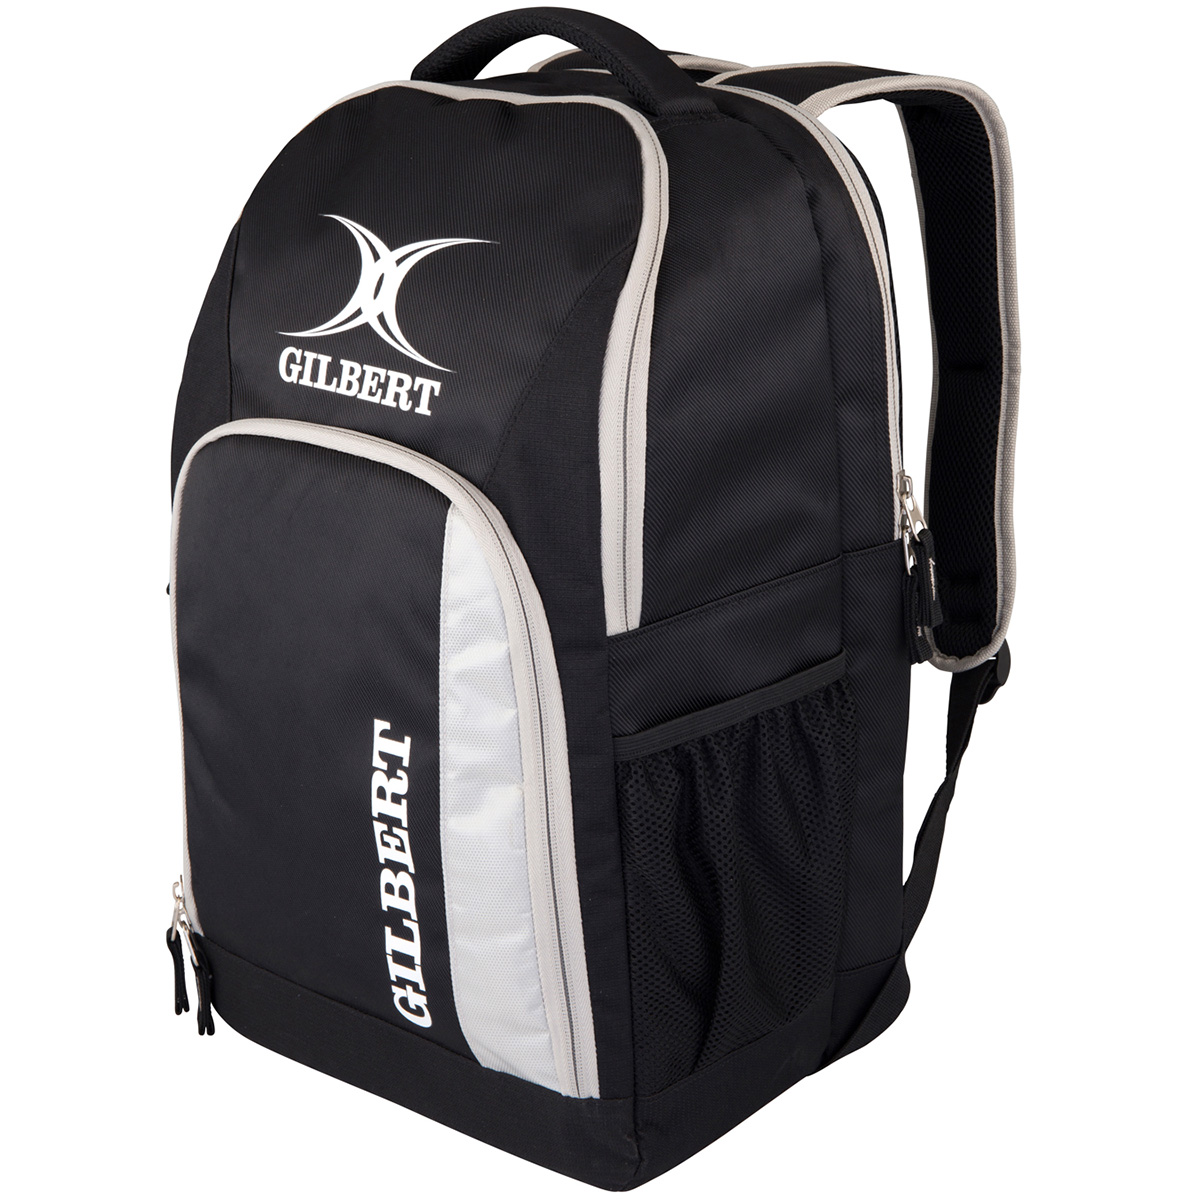 Gilbert Club Backpack Blk Front ?view=976&v=637855504200000000